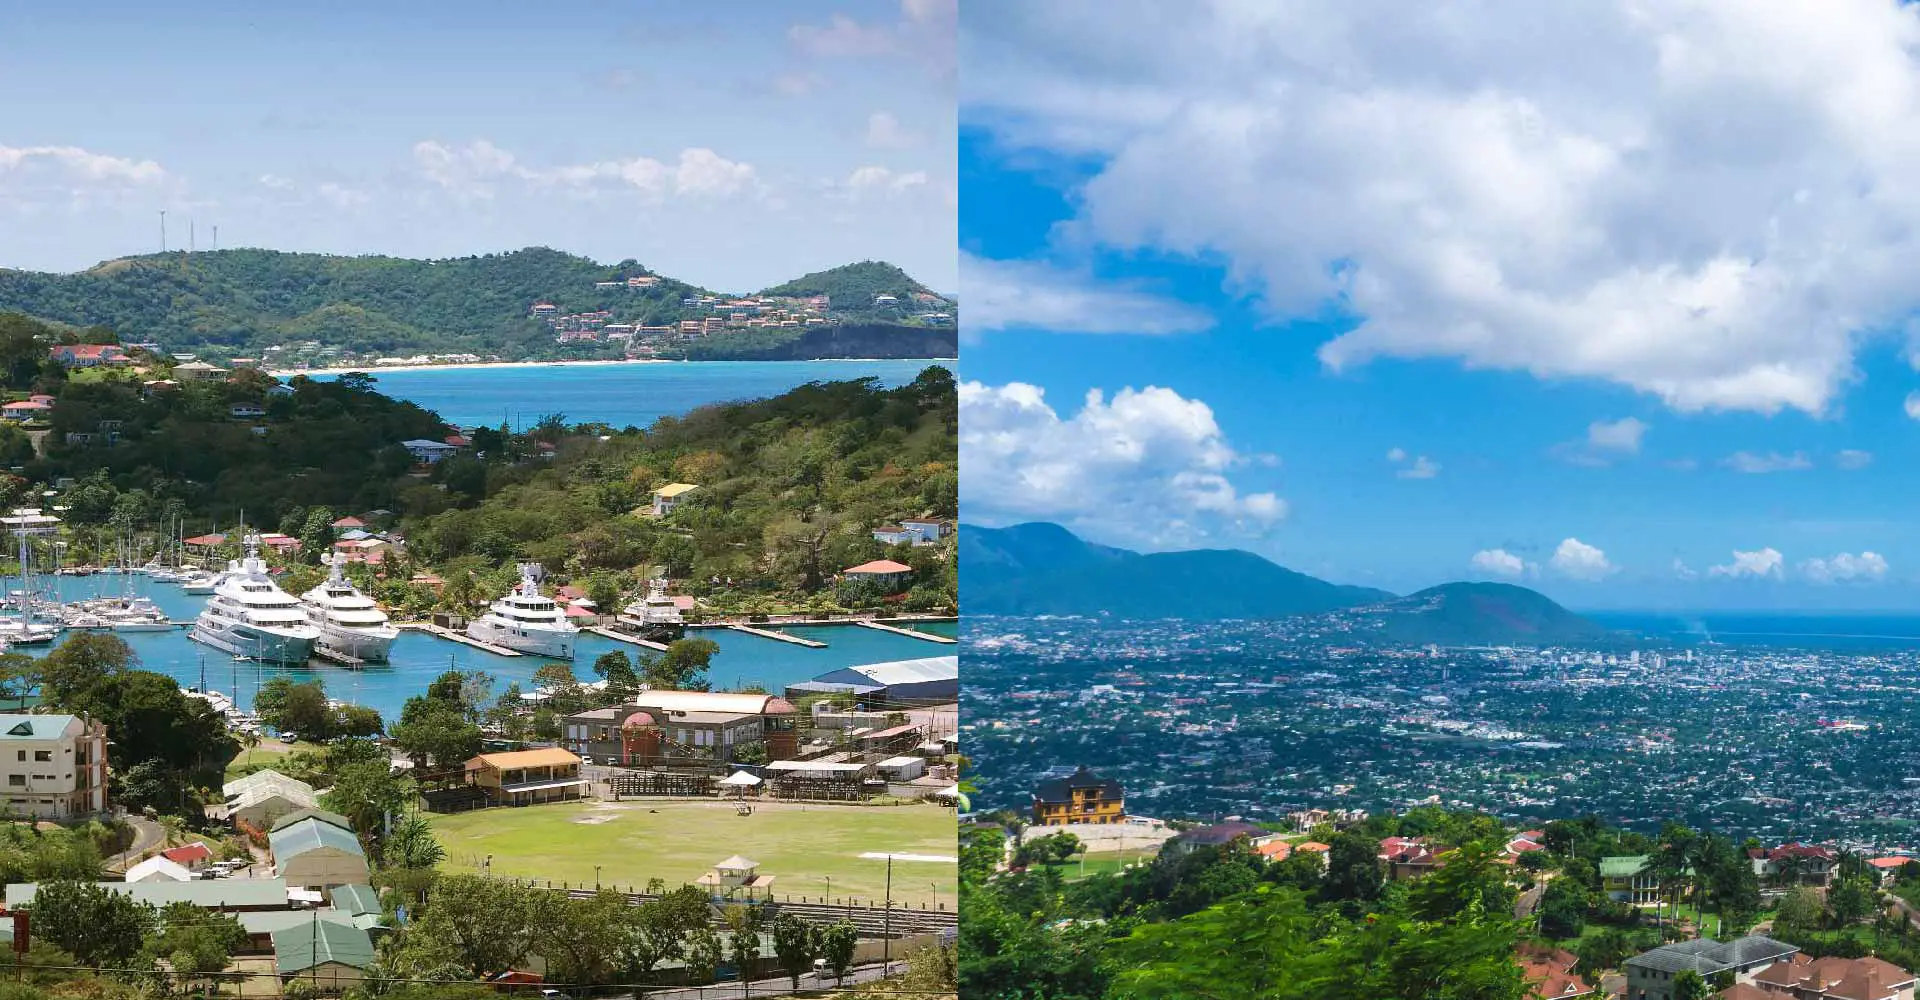 side by side photos of Grenada and Jamaica's landscape